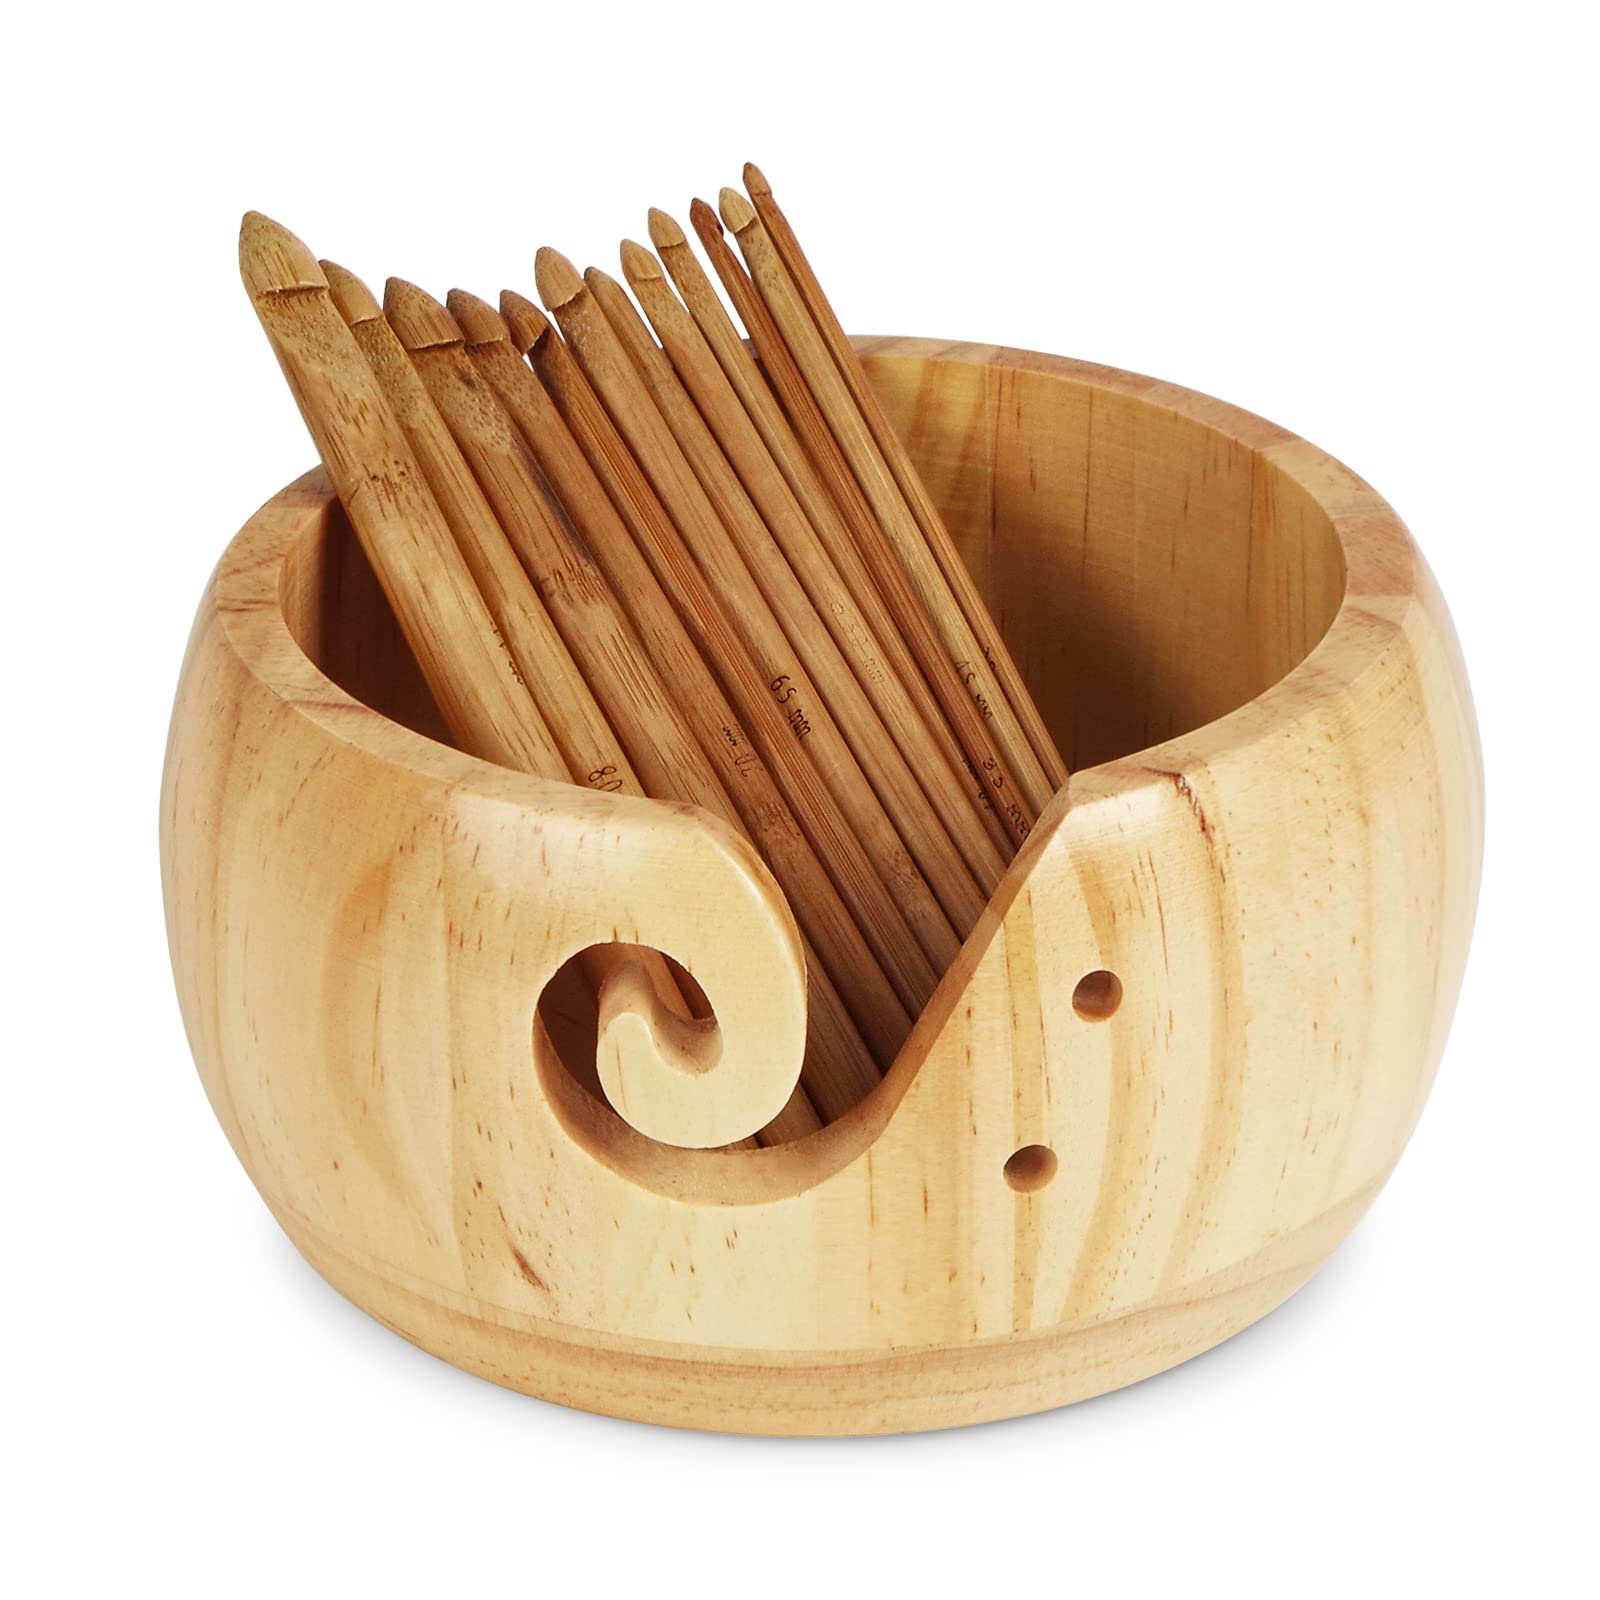 KOUISYY Wooden Yarn Bowl,Knitting Yarn Holder,Pine Crochet Bowl Holder with Lid and Carved Holes,Round Yarn Bowls for Crocheting,Wooden Weaving